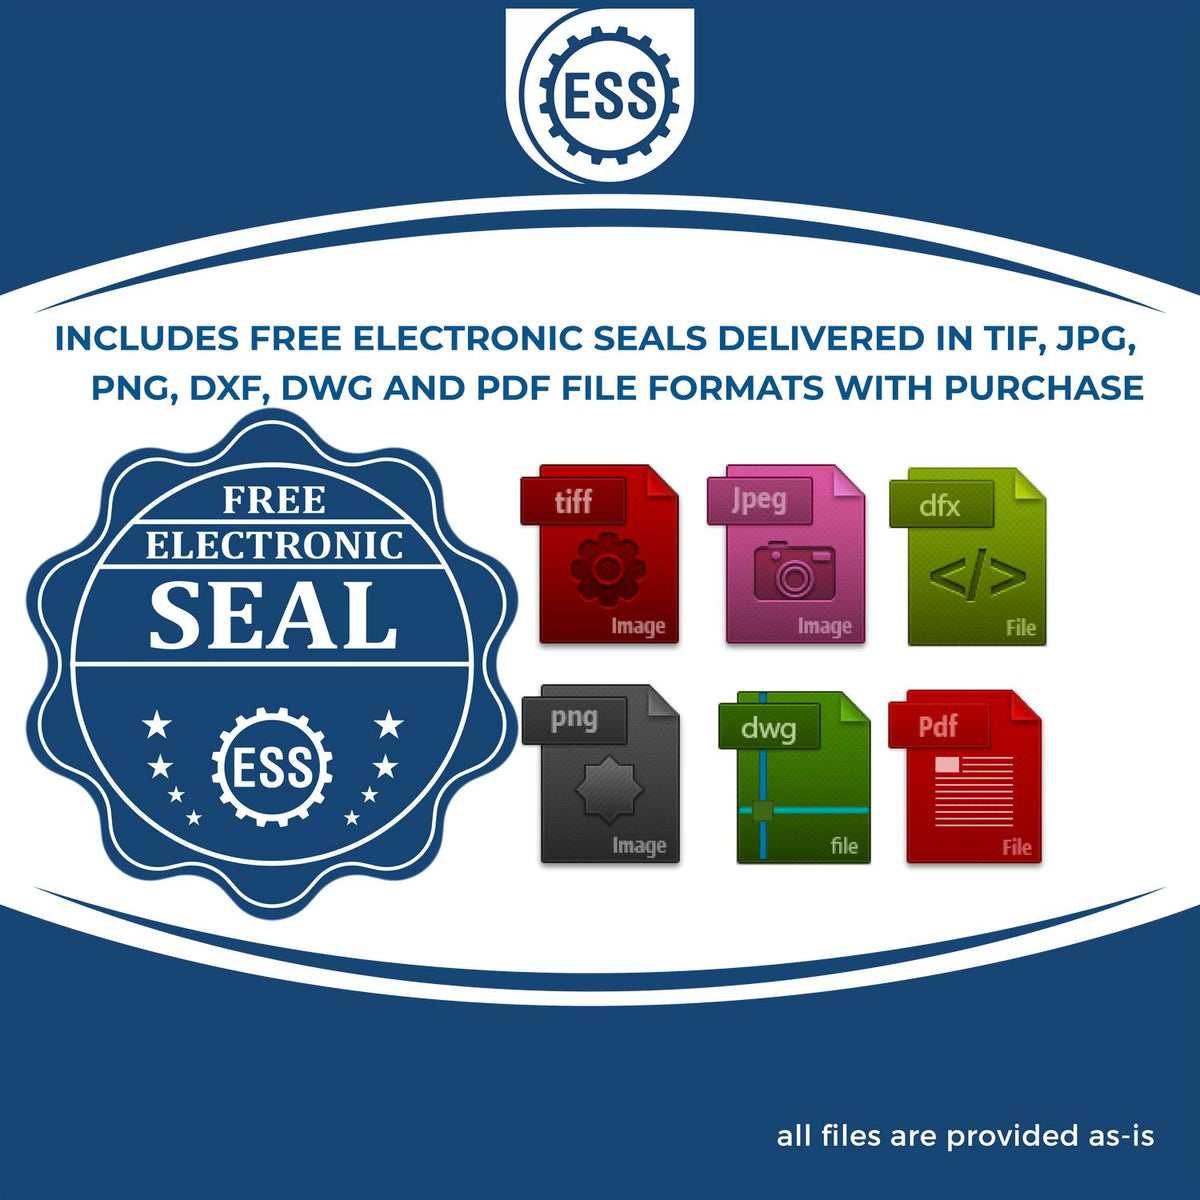 An infographic for the free electronic seal for the Slim Pre-Inked Vermont Landscape Architect Seal Stamp illustrating the different file type icons such as DXF, DWG, TIF, JPG and PNG.